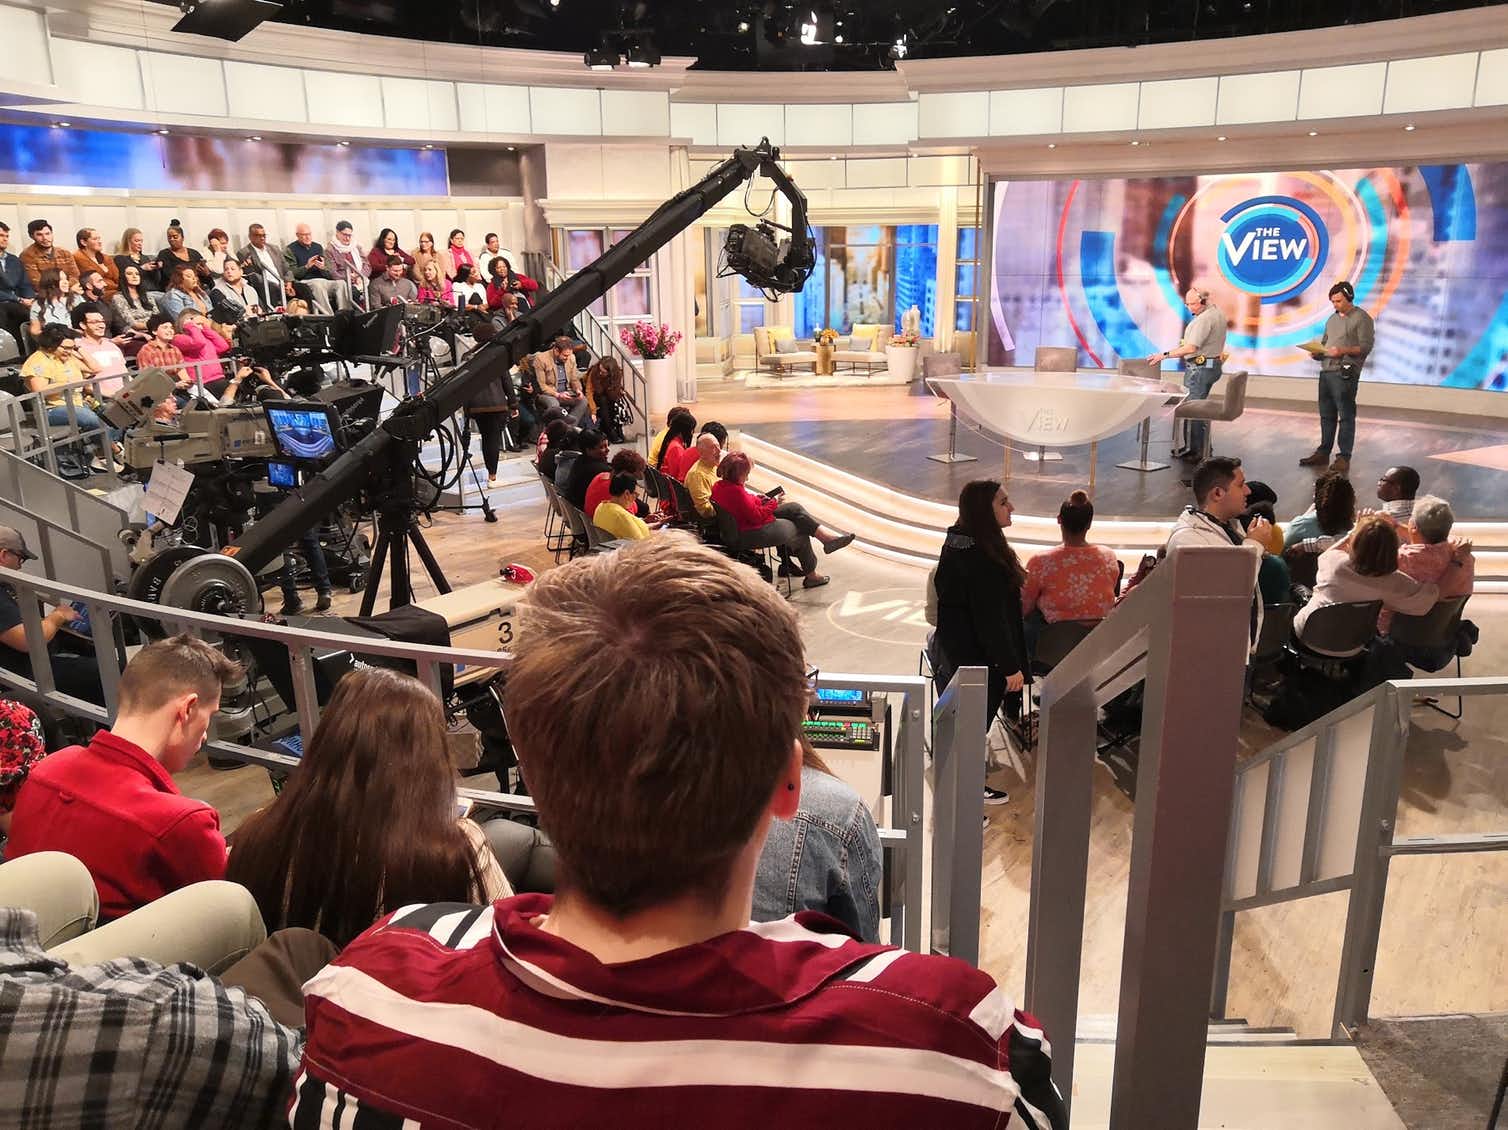 The last audience, for now, at ‘The View’